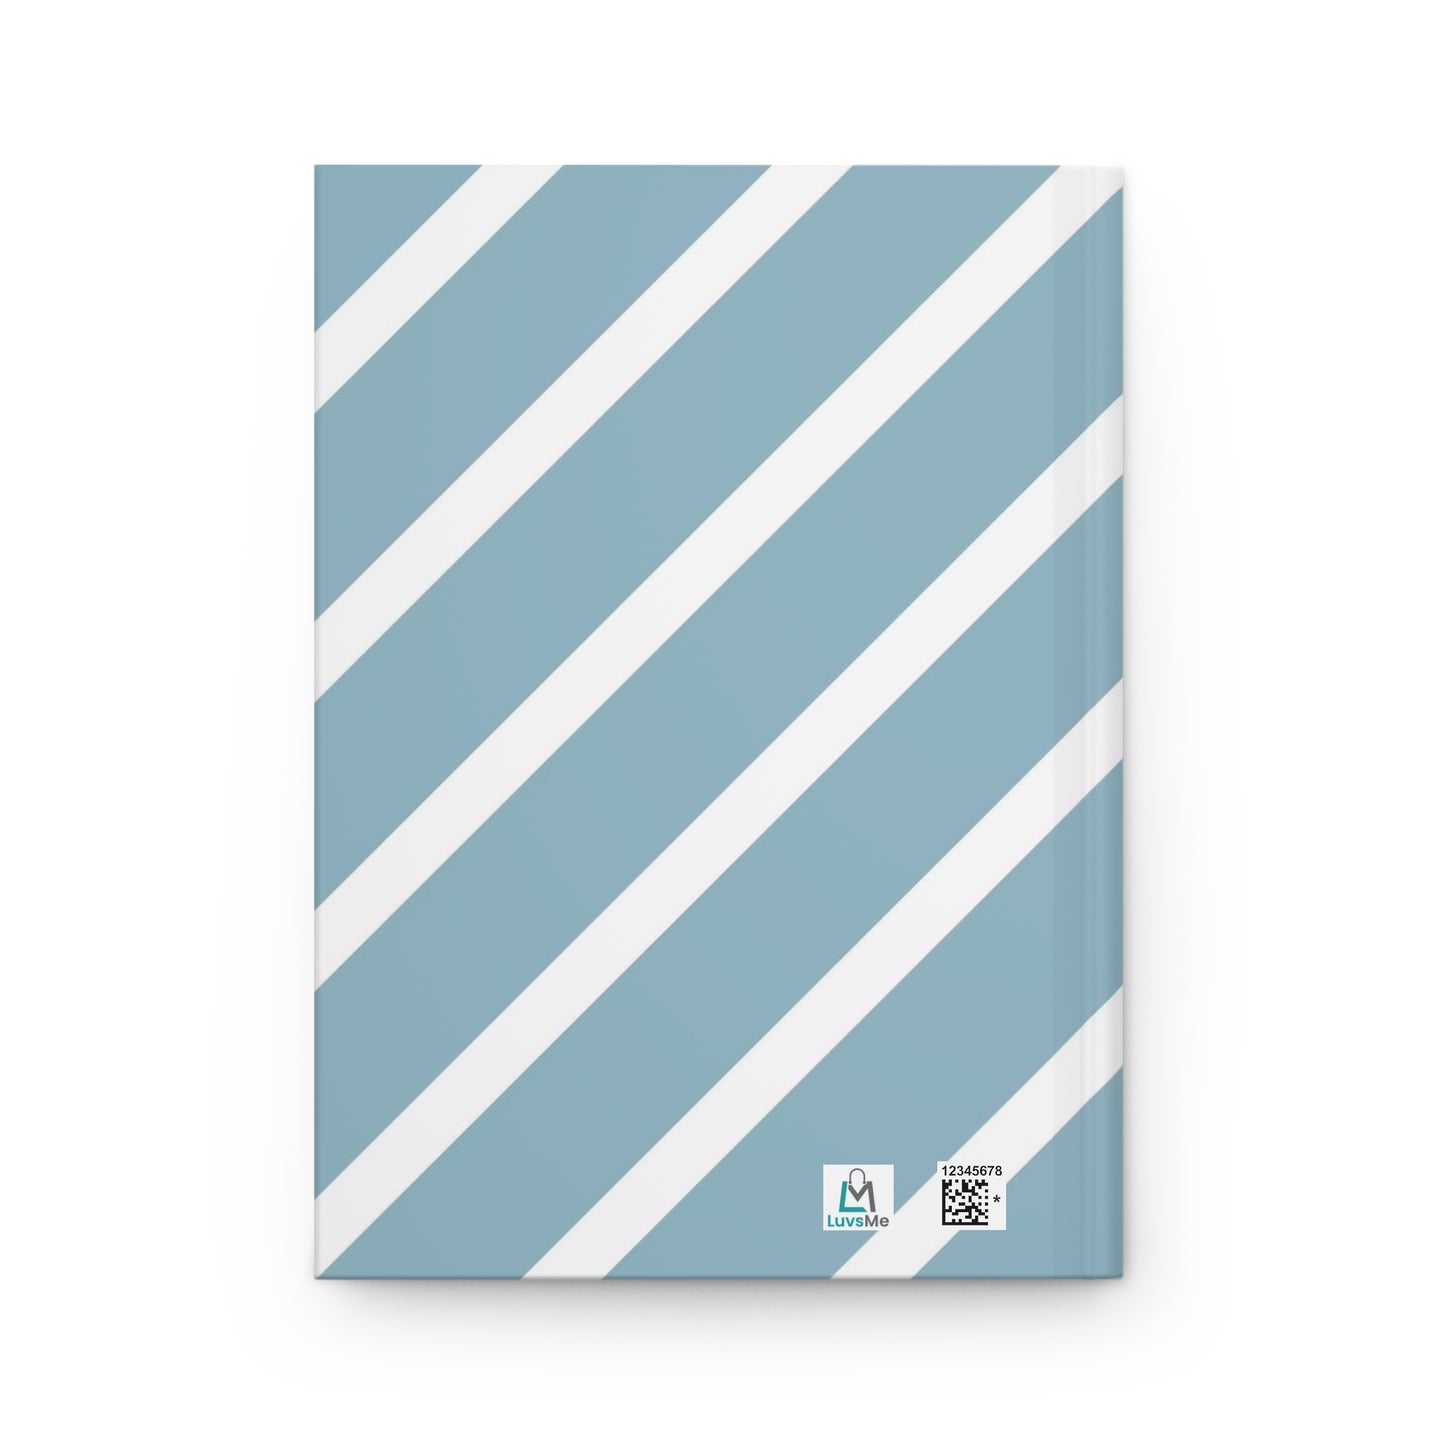 Find joy in the journey - Self Love - Inspirational Quote  - Blue White Diagonal 4 - Hardcover Journal Matte